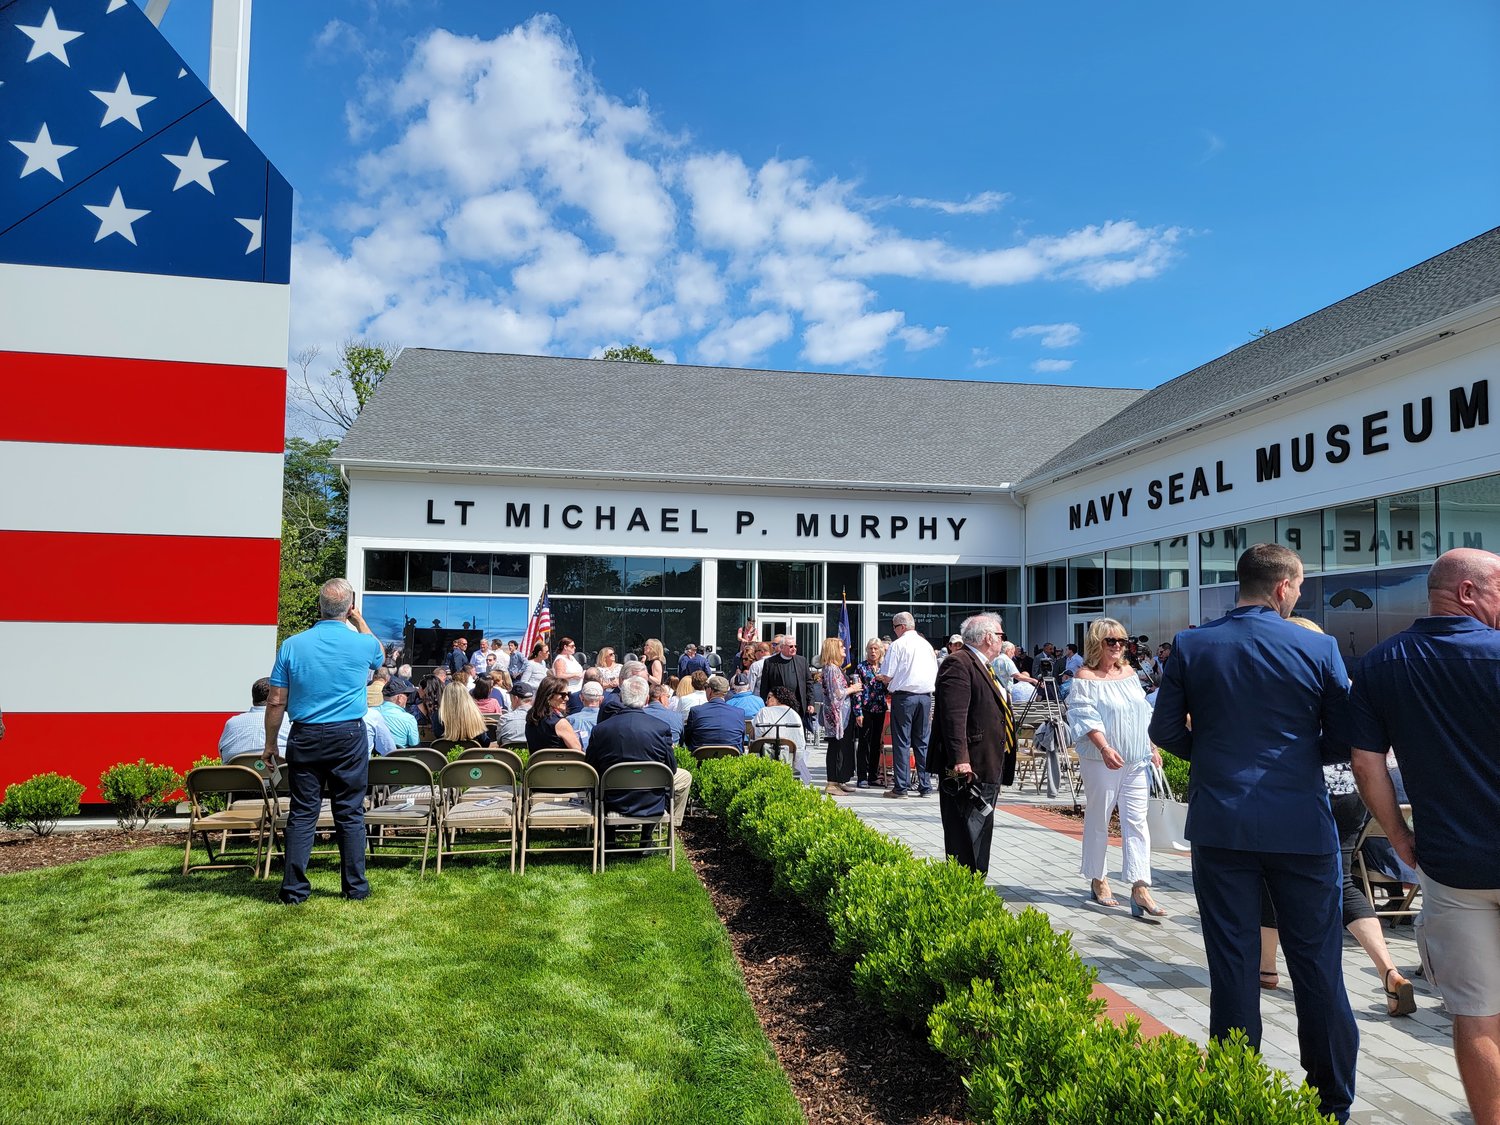 Over 1,000 attendees came to the ribbon cutting of the Lt. Michael Murphy Navy SEAL Museum. The crowd was treated to a special descent by the Navy’s Leapfrog team, who parachuted down to the West Sayville Golf Course driving range, next door to the museum.